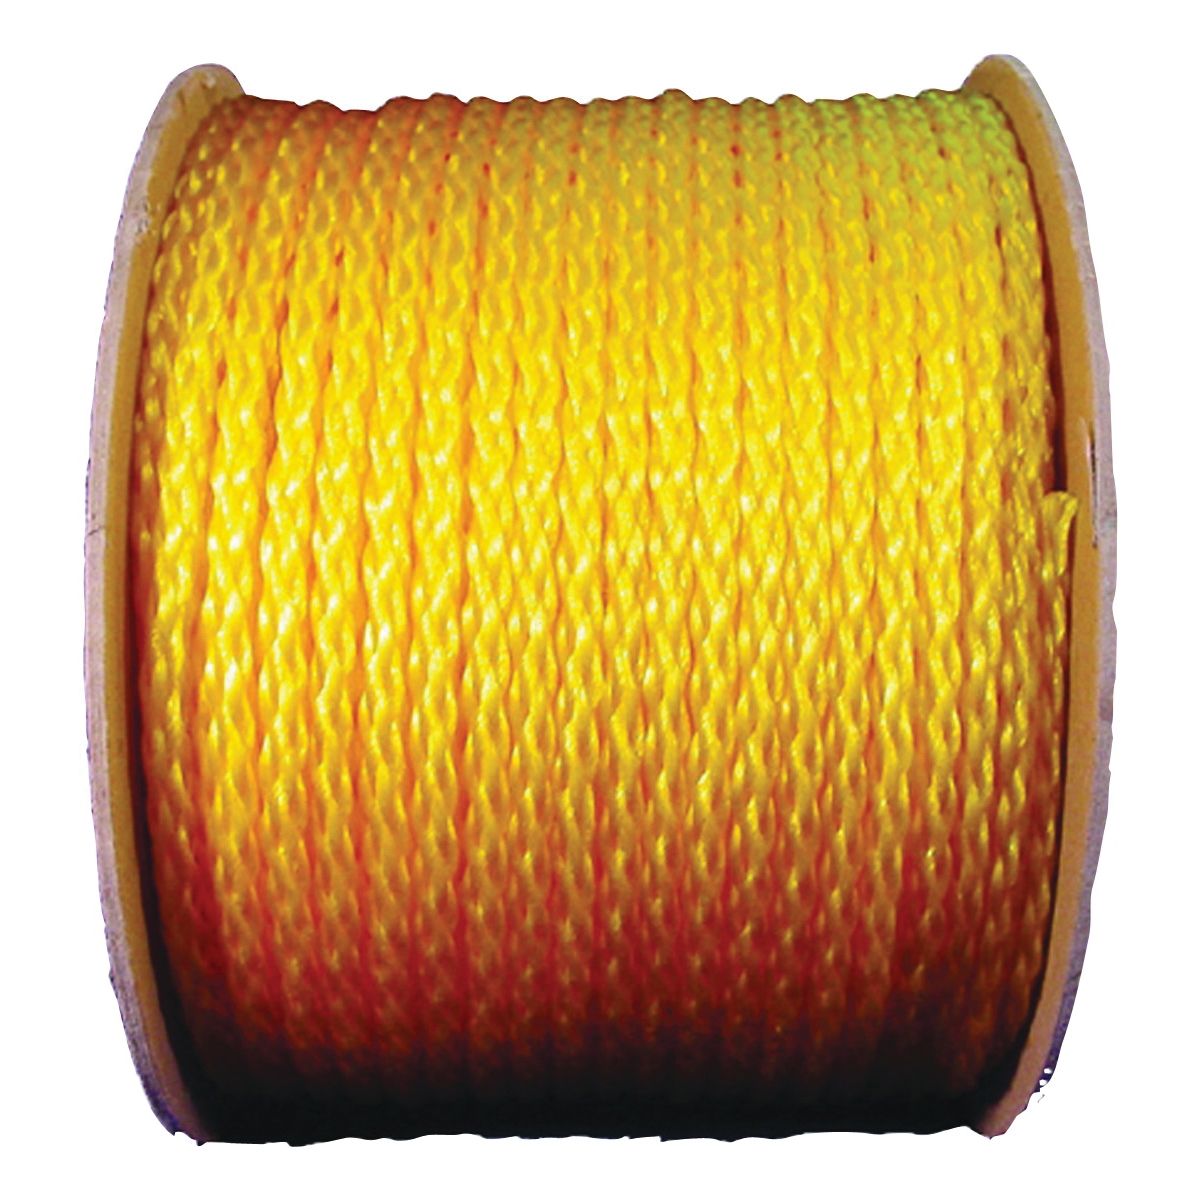 Mixed Metal Braided Twine, 1320' & 2640’ lengths